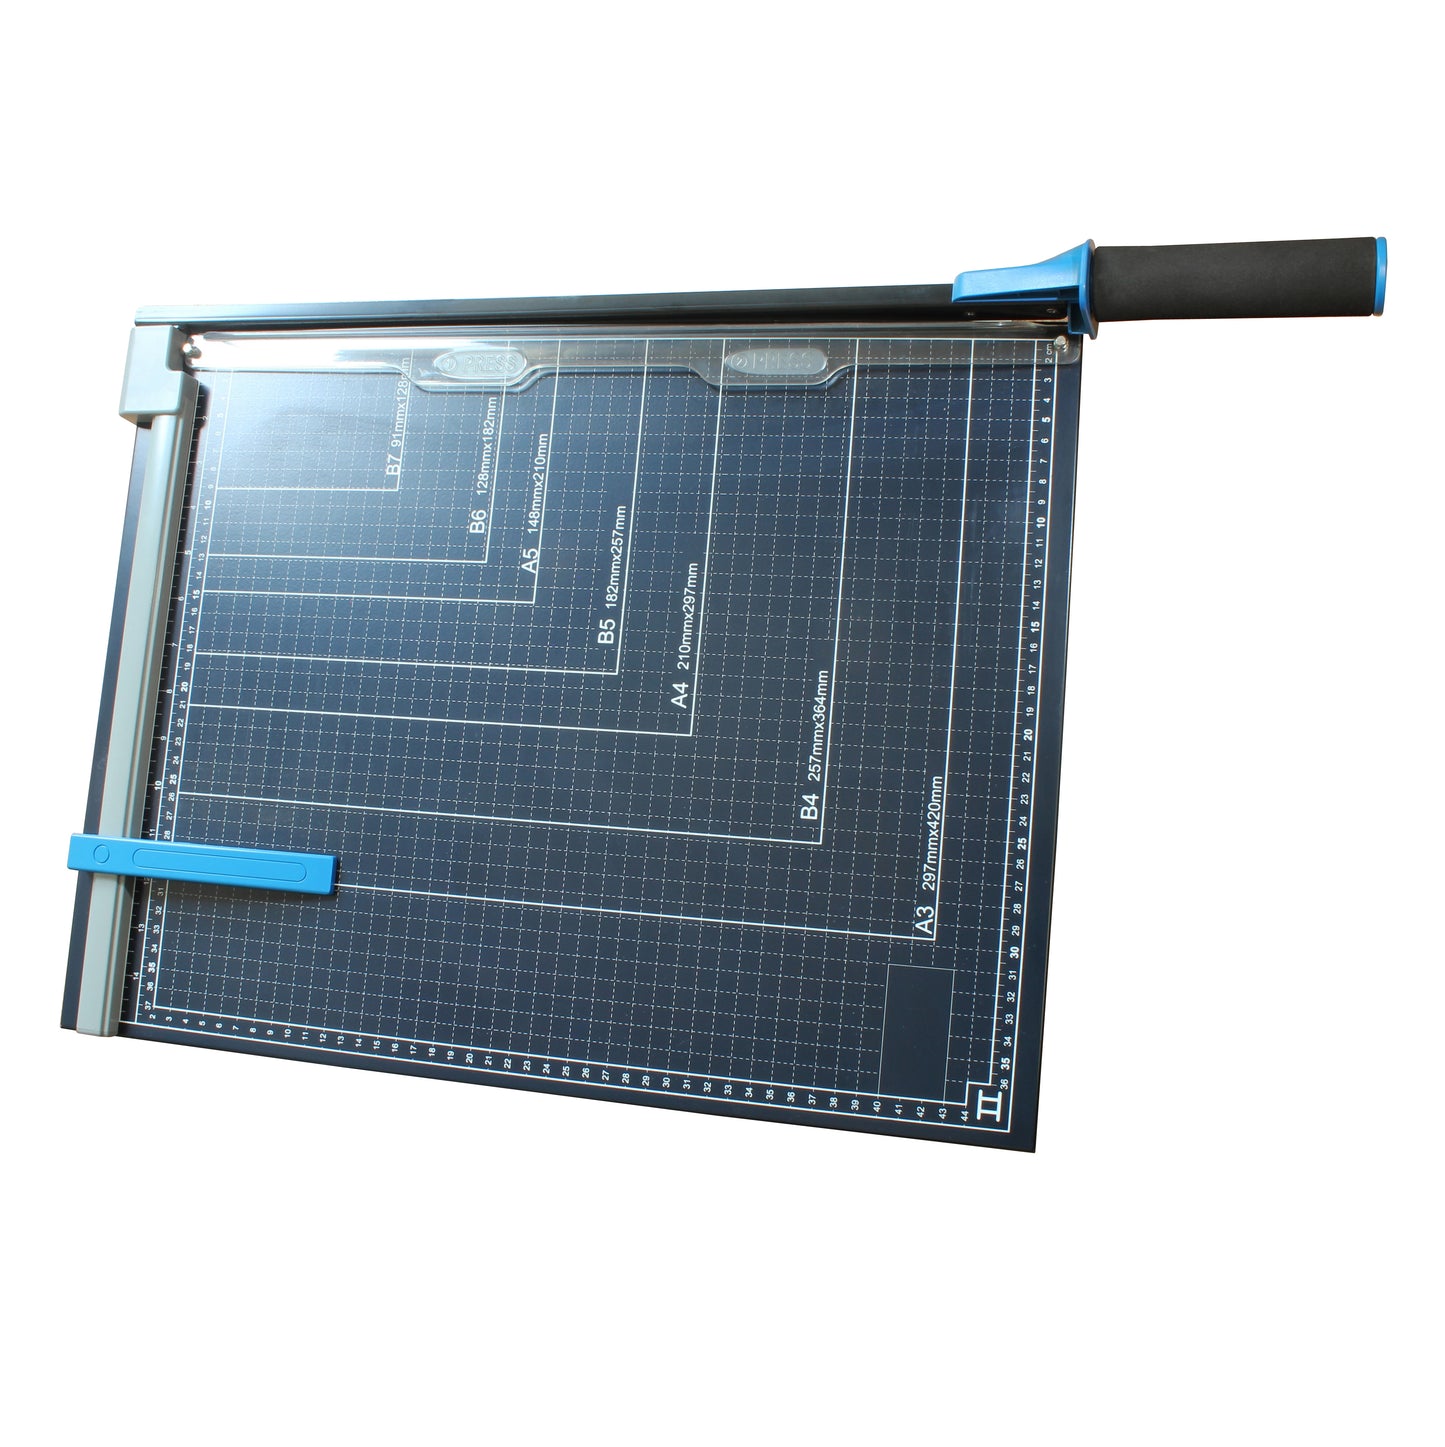 A professional A3 paper guillotine cutter featuring a metal base with printed grid lines and size indicators, equipped with a blue handle for precise paper cutting, isolated on a white background.